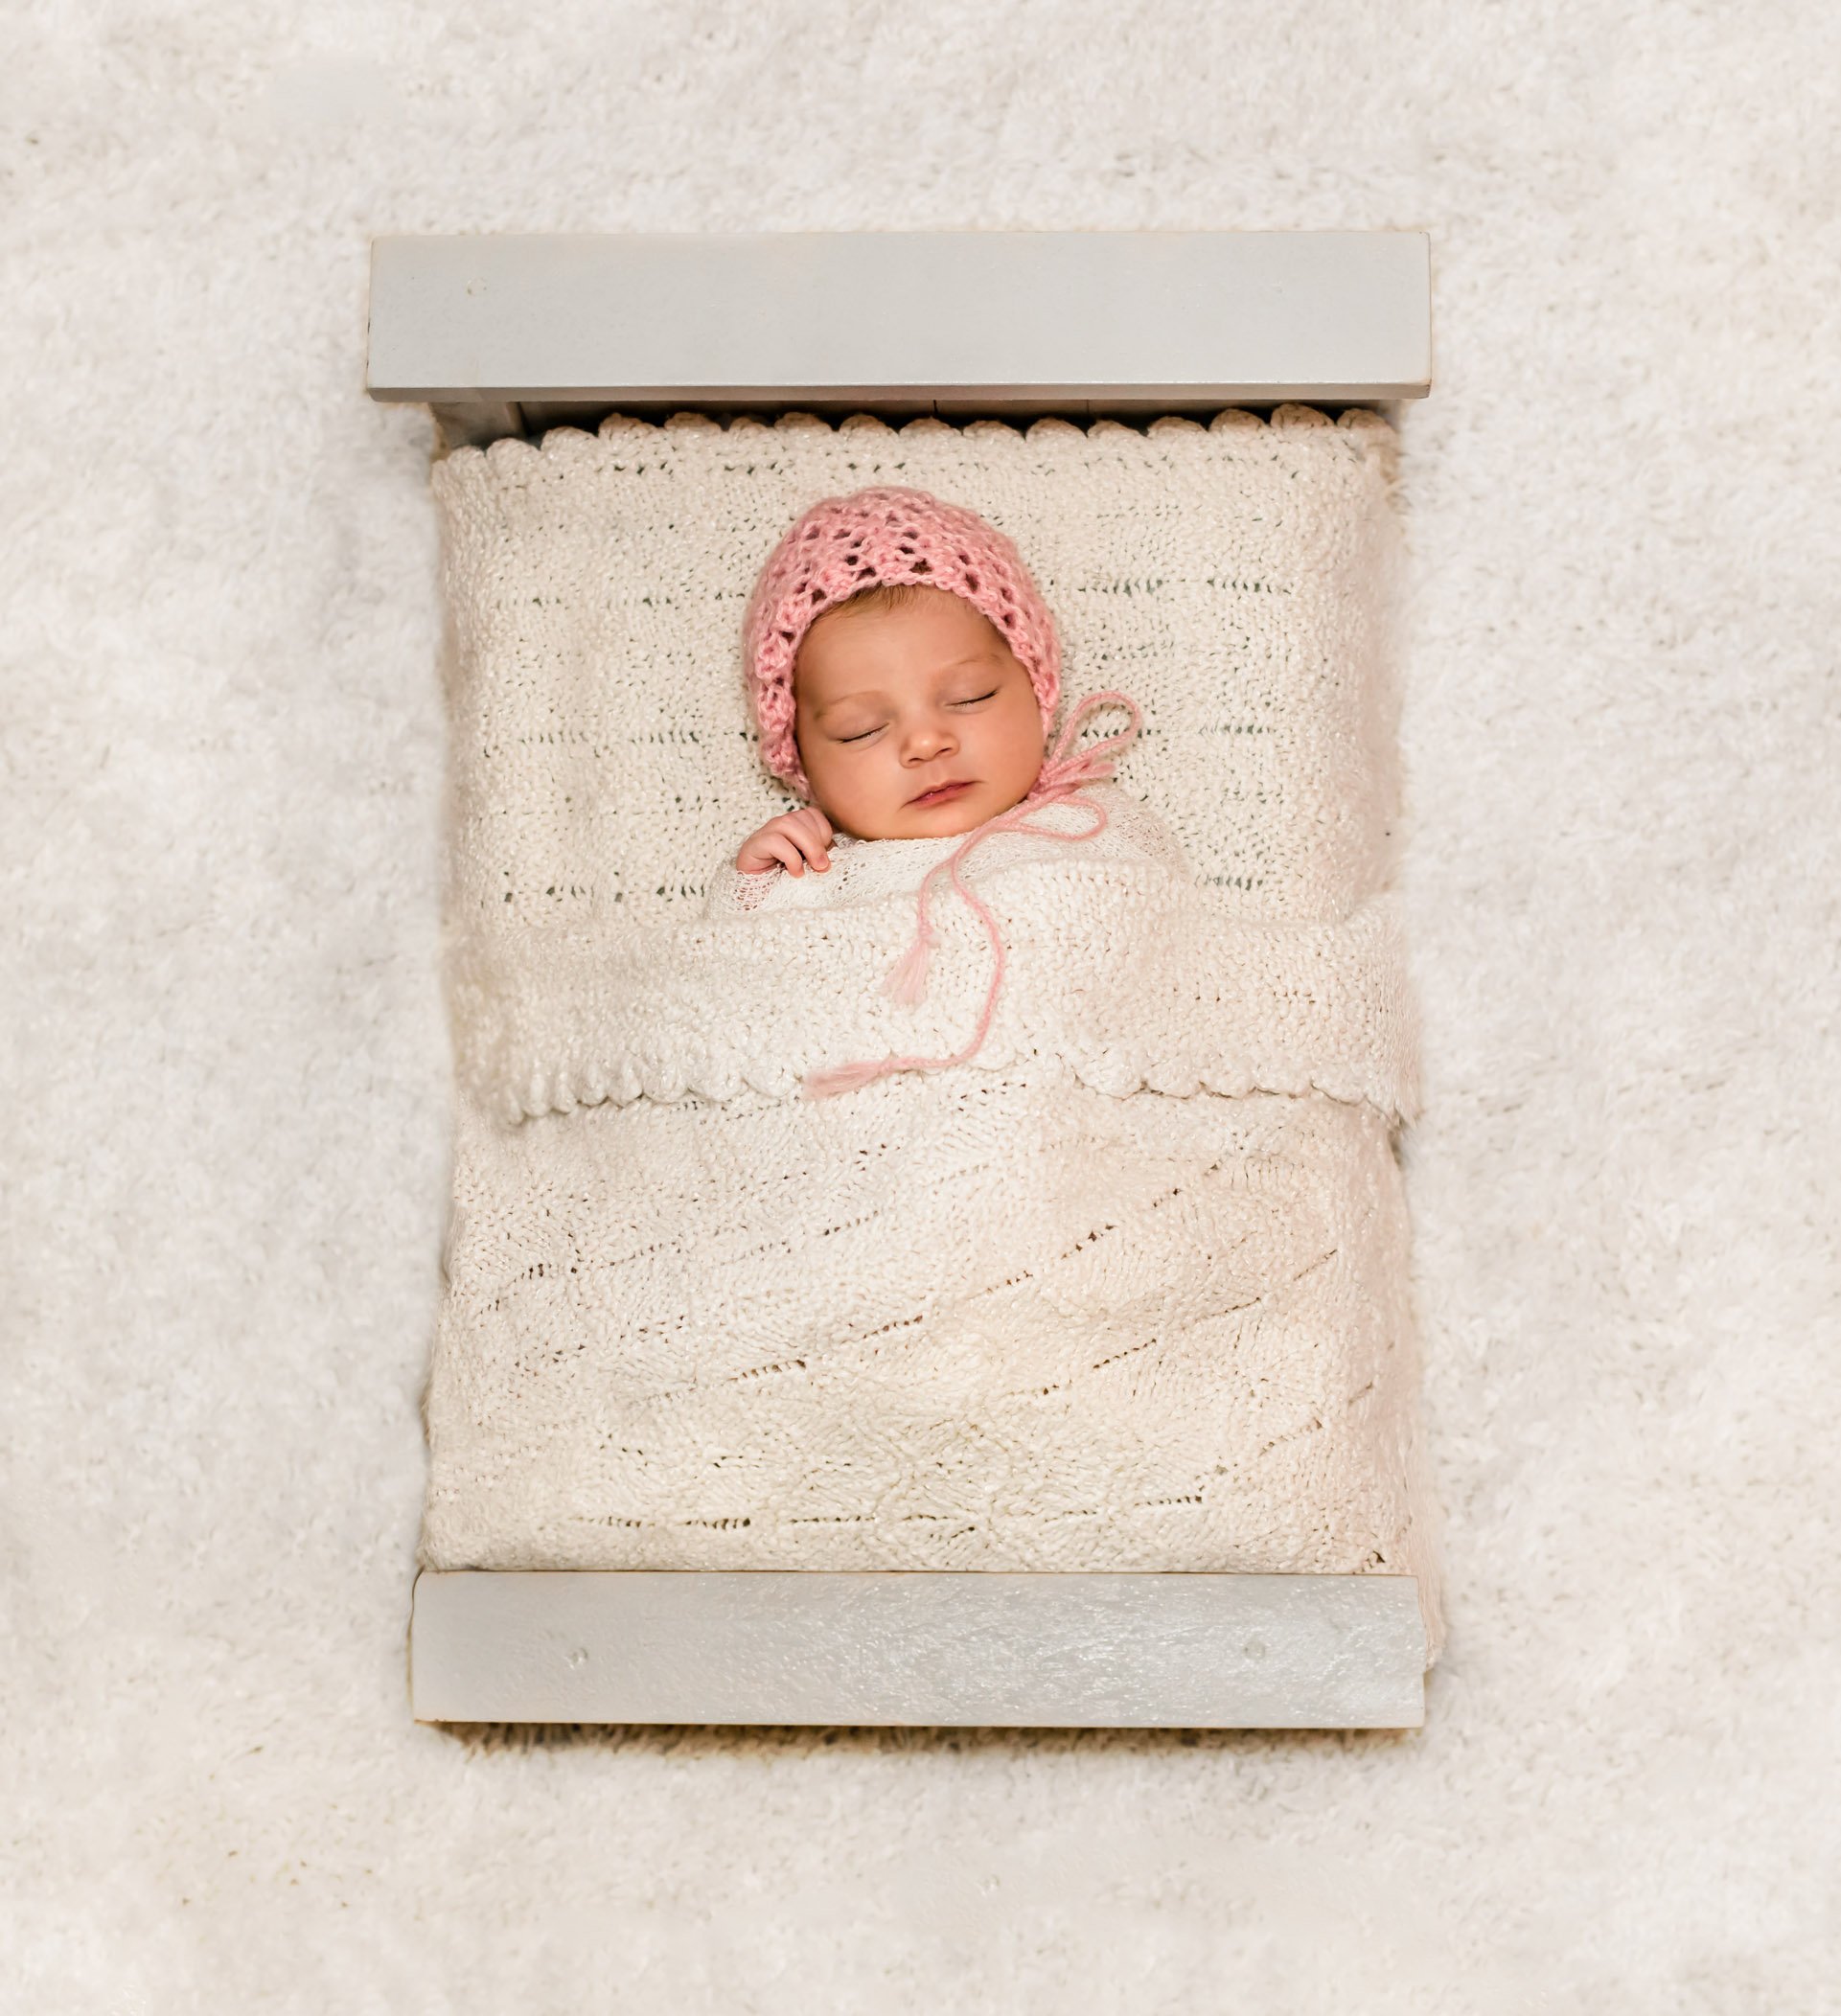 newborn baby girl sleeping in a doll bed with a pink bonnet on